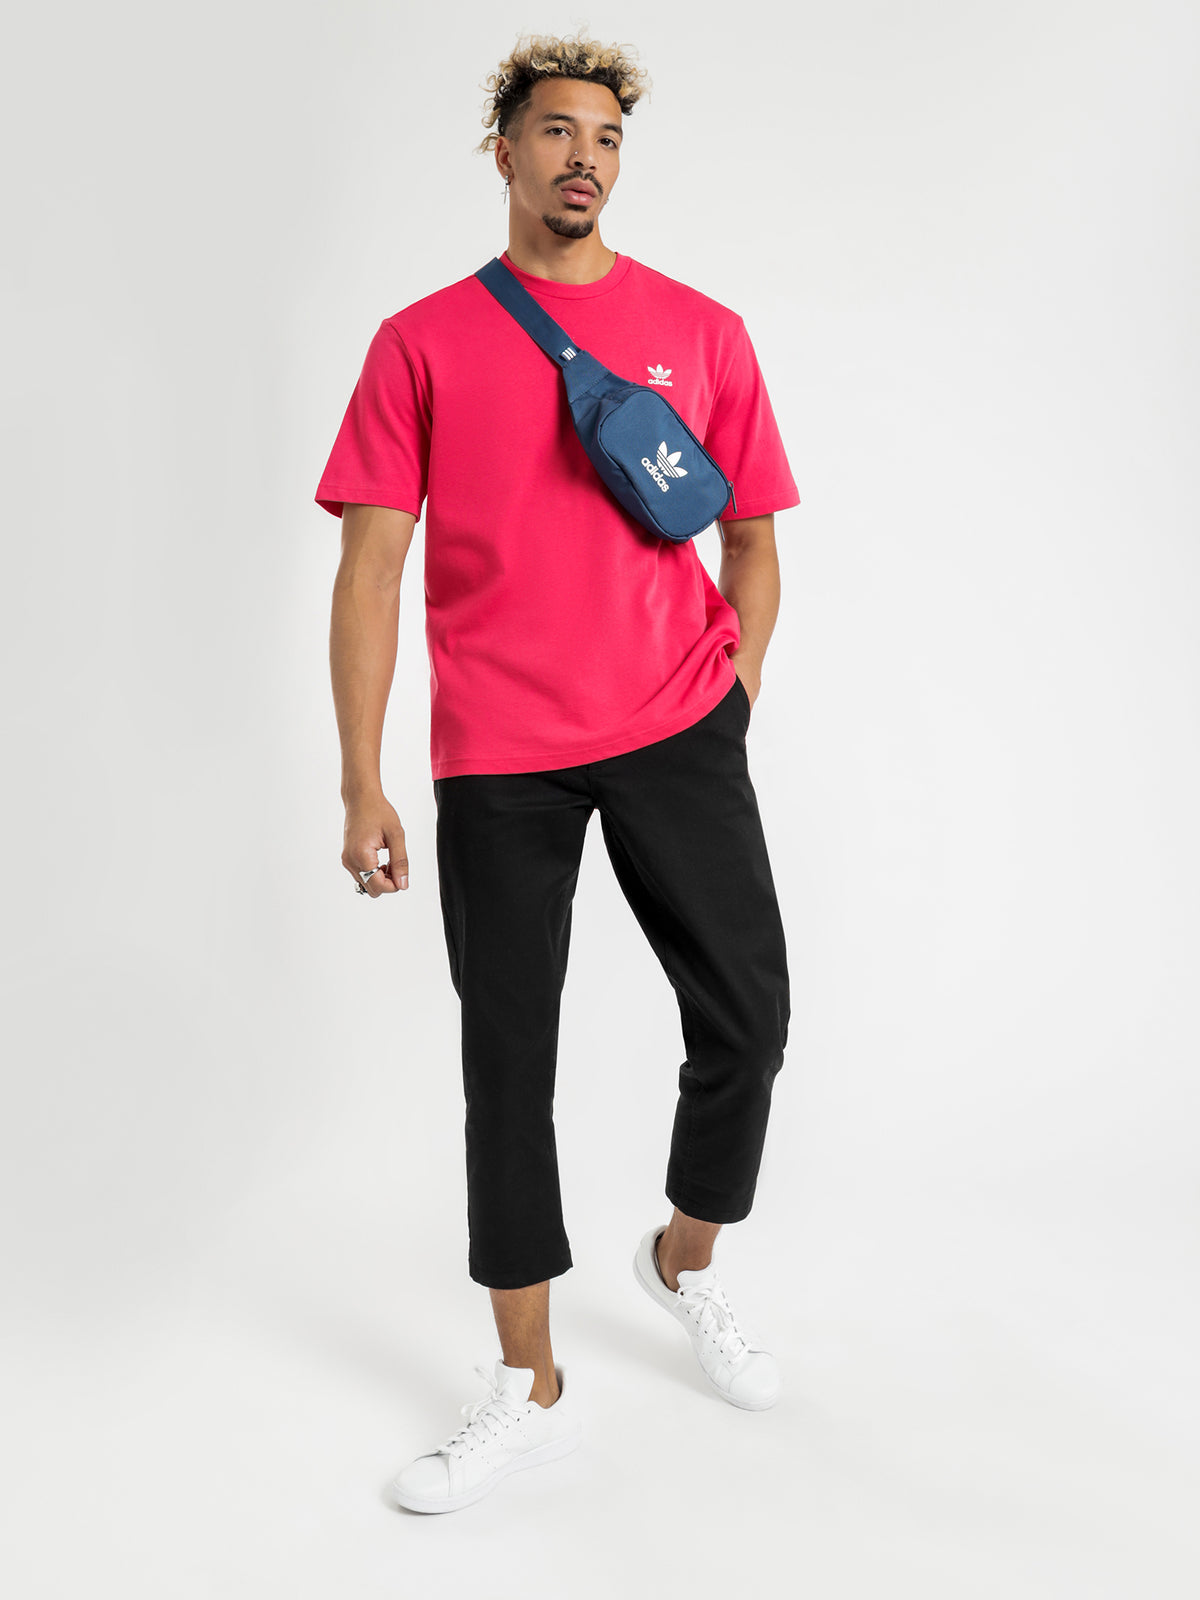 Originals Trefoil Boxy T-Shirt in Power Pink